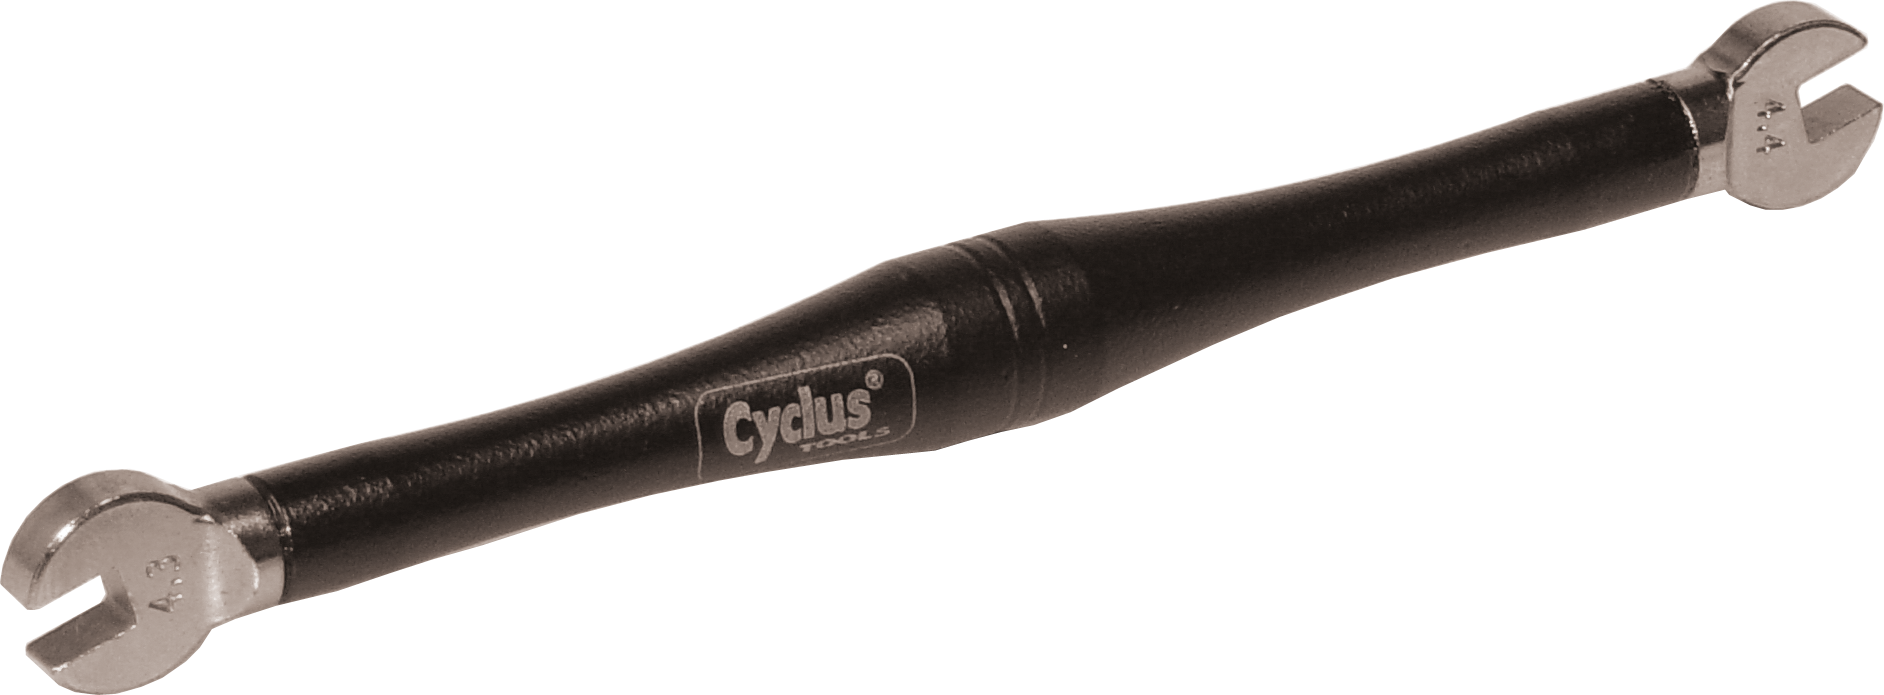 "CYCLUS TOOLS spoke wrench for SHIMANO wheels. 4.3 4.4mm"